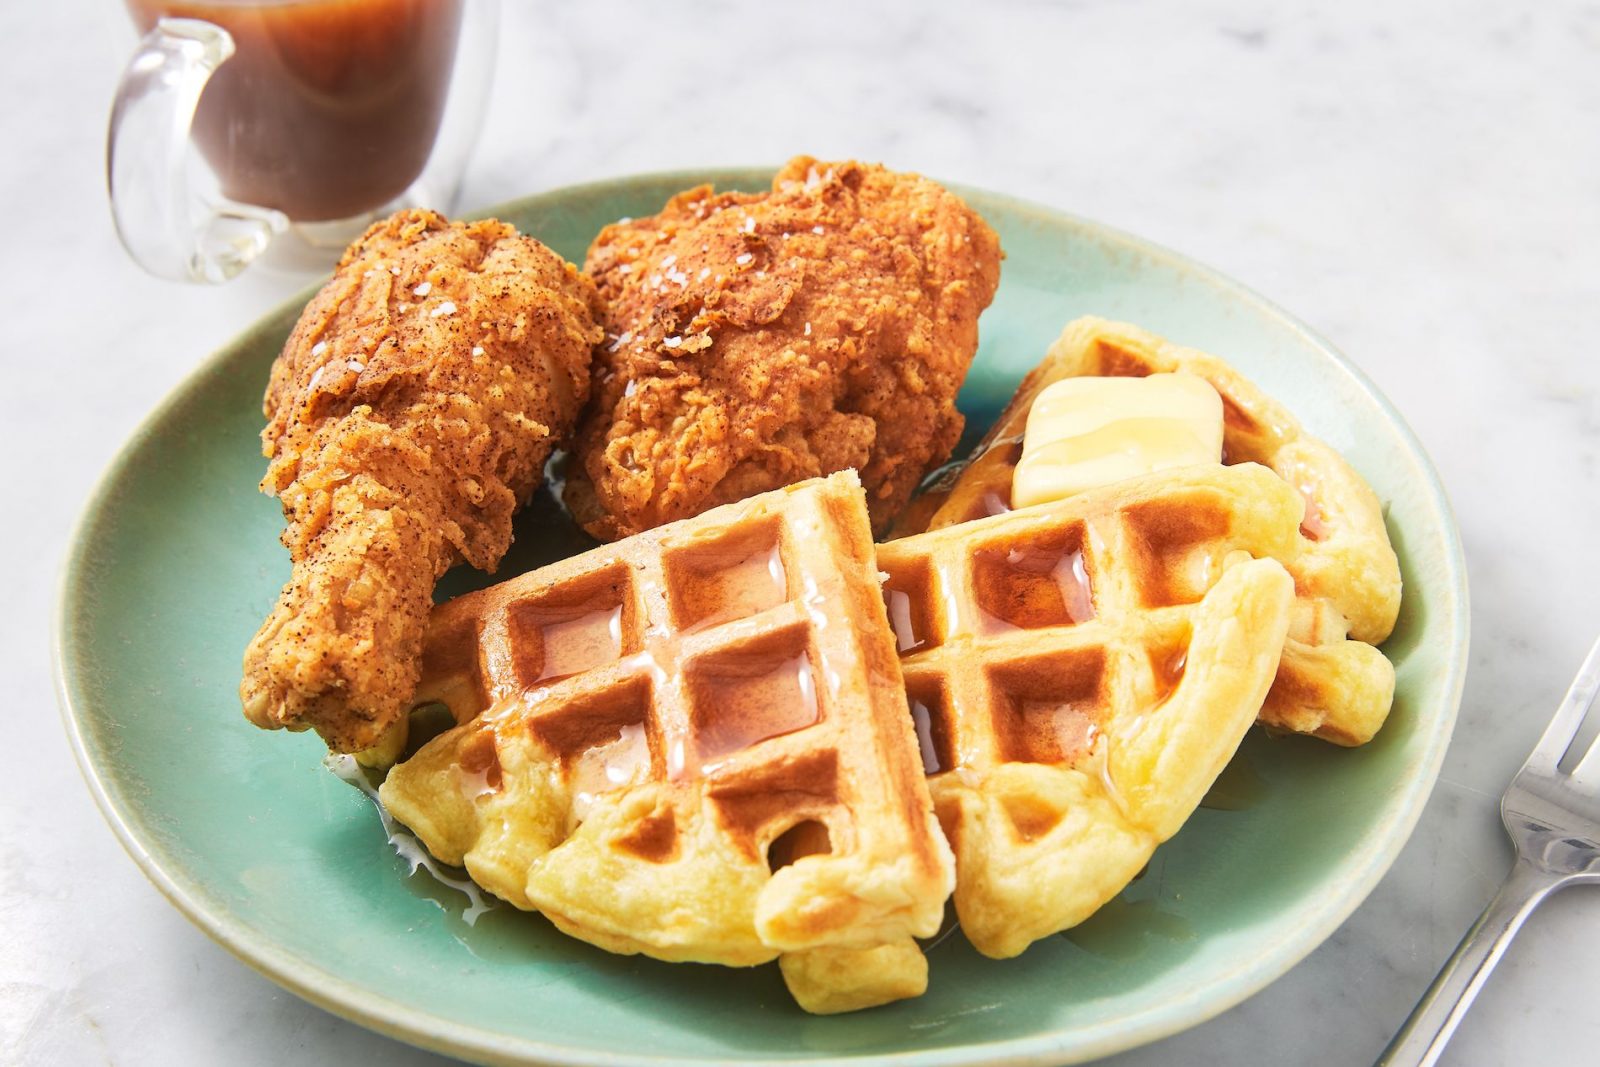 What Soup Am I? Chicken and waffles